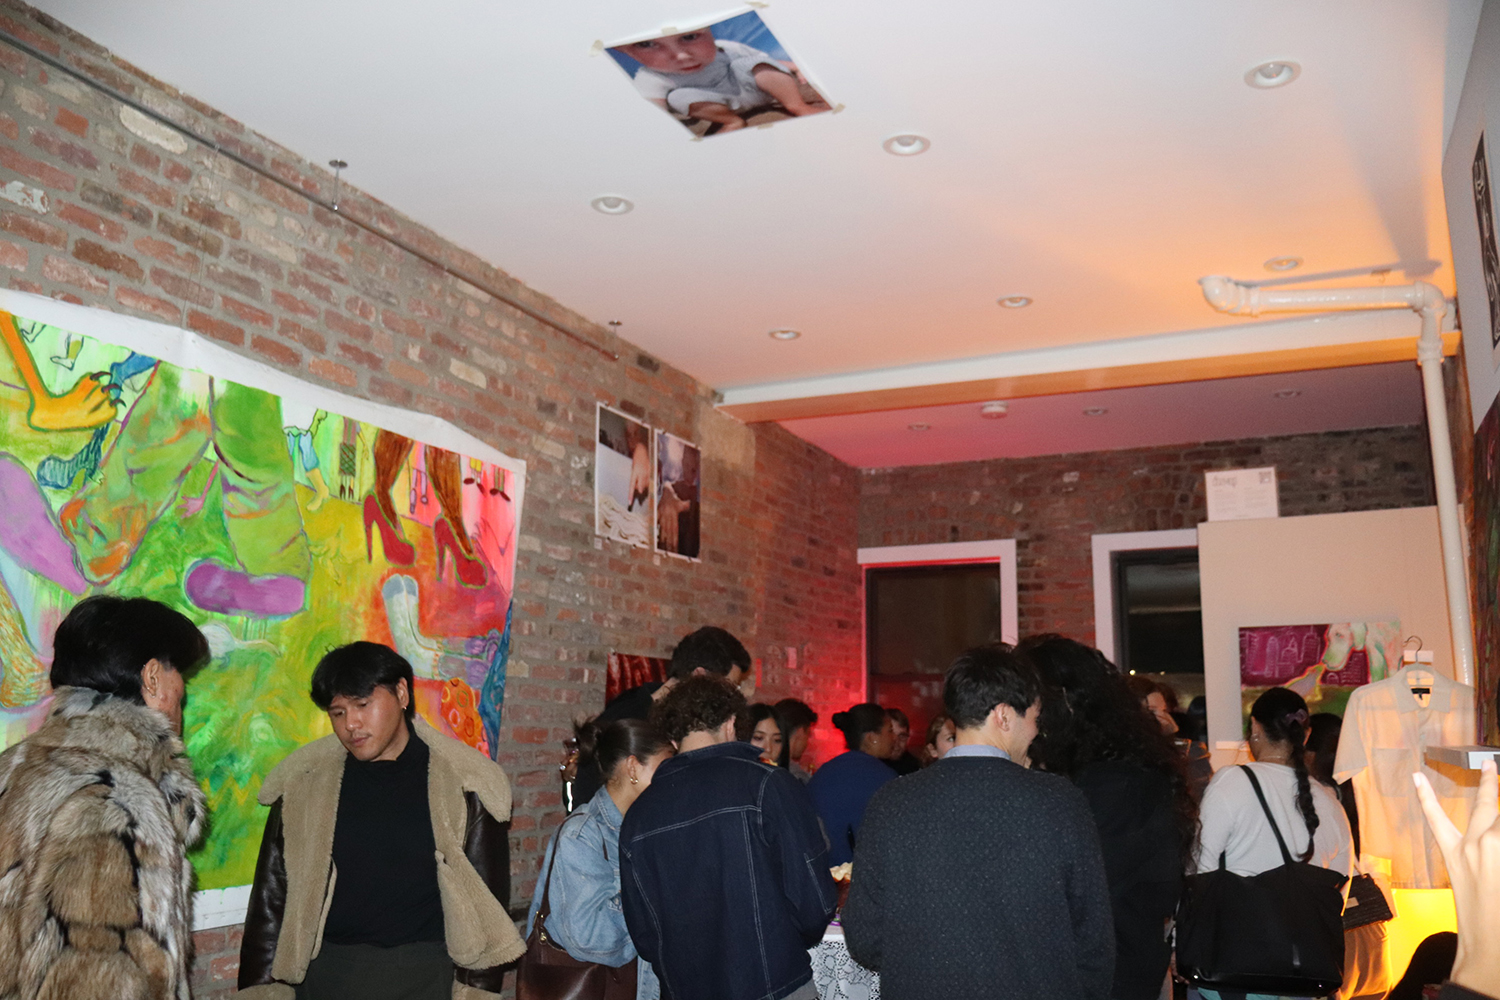 A crowd of people inside a room with brick walls on the left side and white walls on the other. A large painting of feet and legs in multiple colors is on the left side wall and there is a picture of a child on the white ceiling.